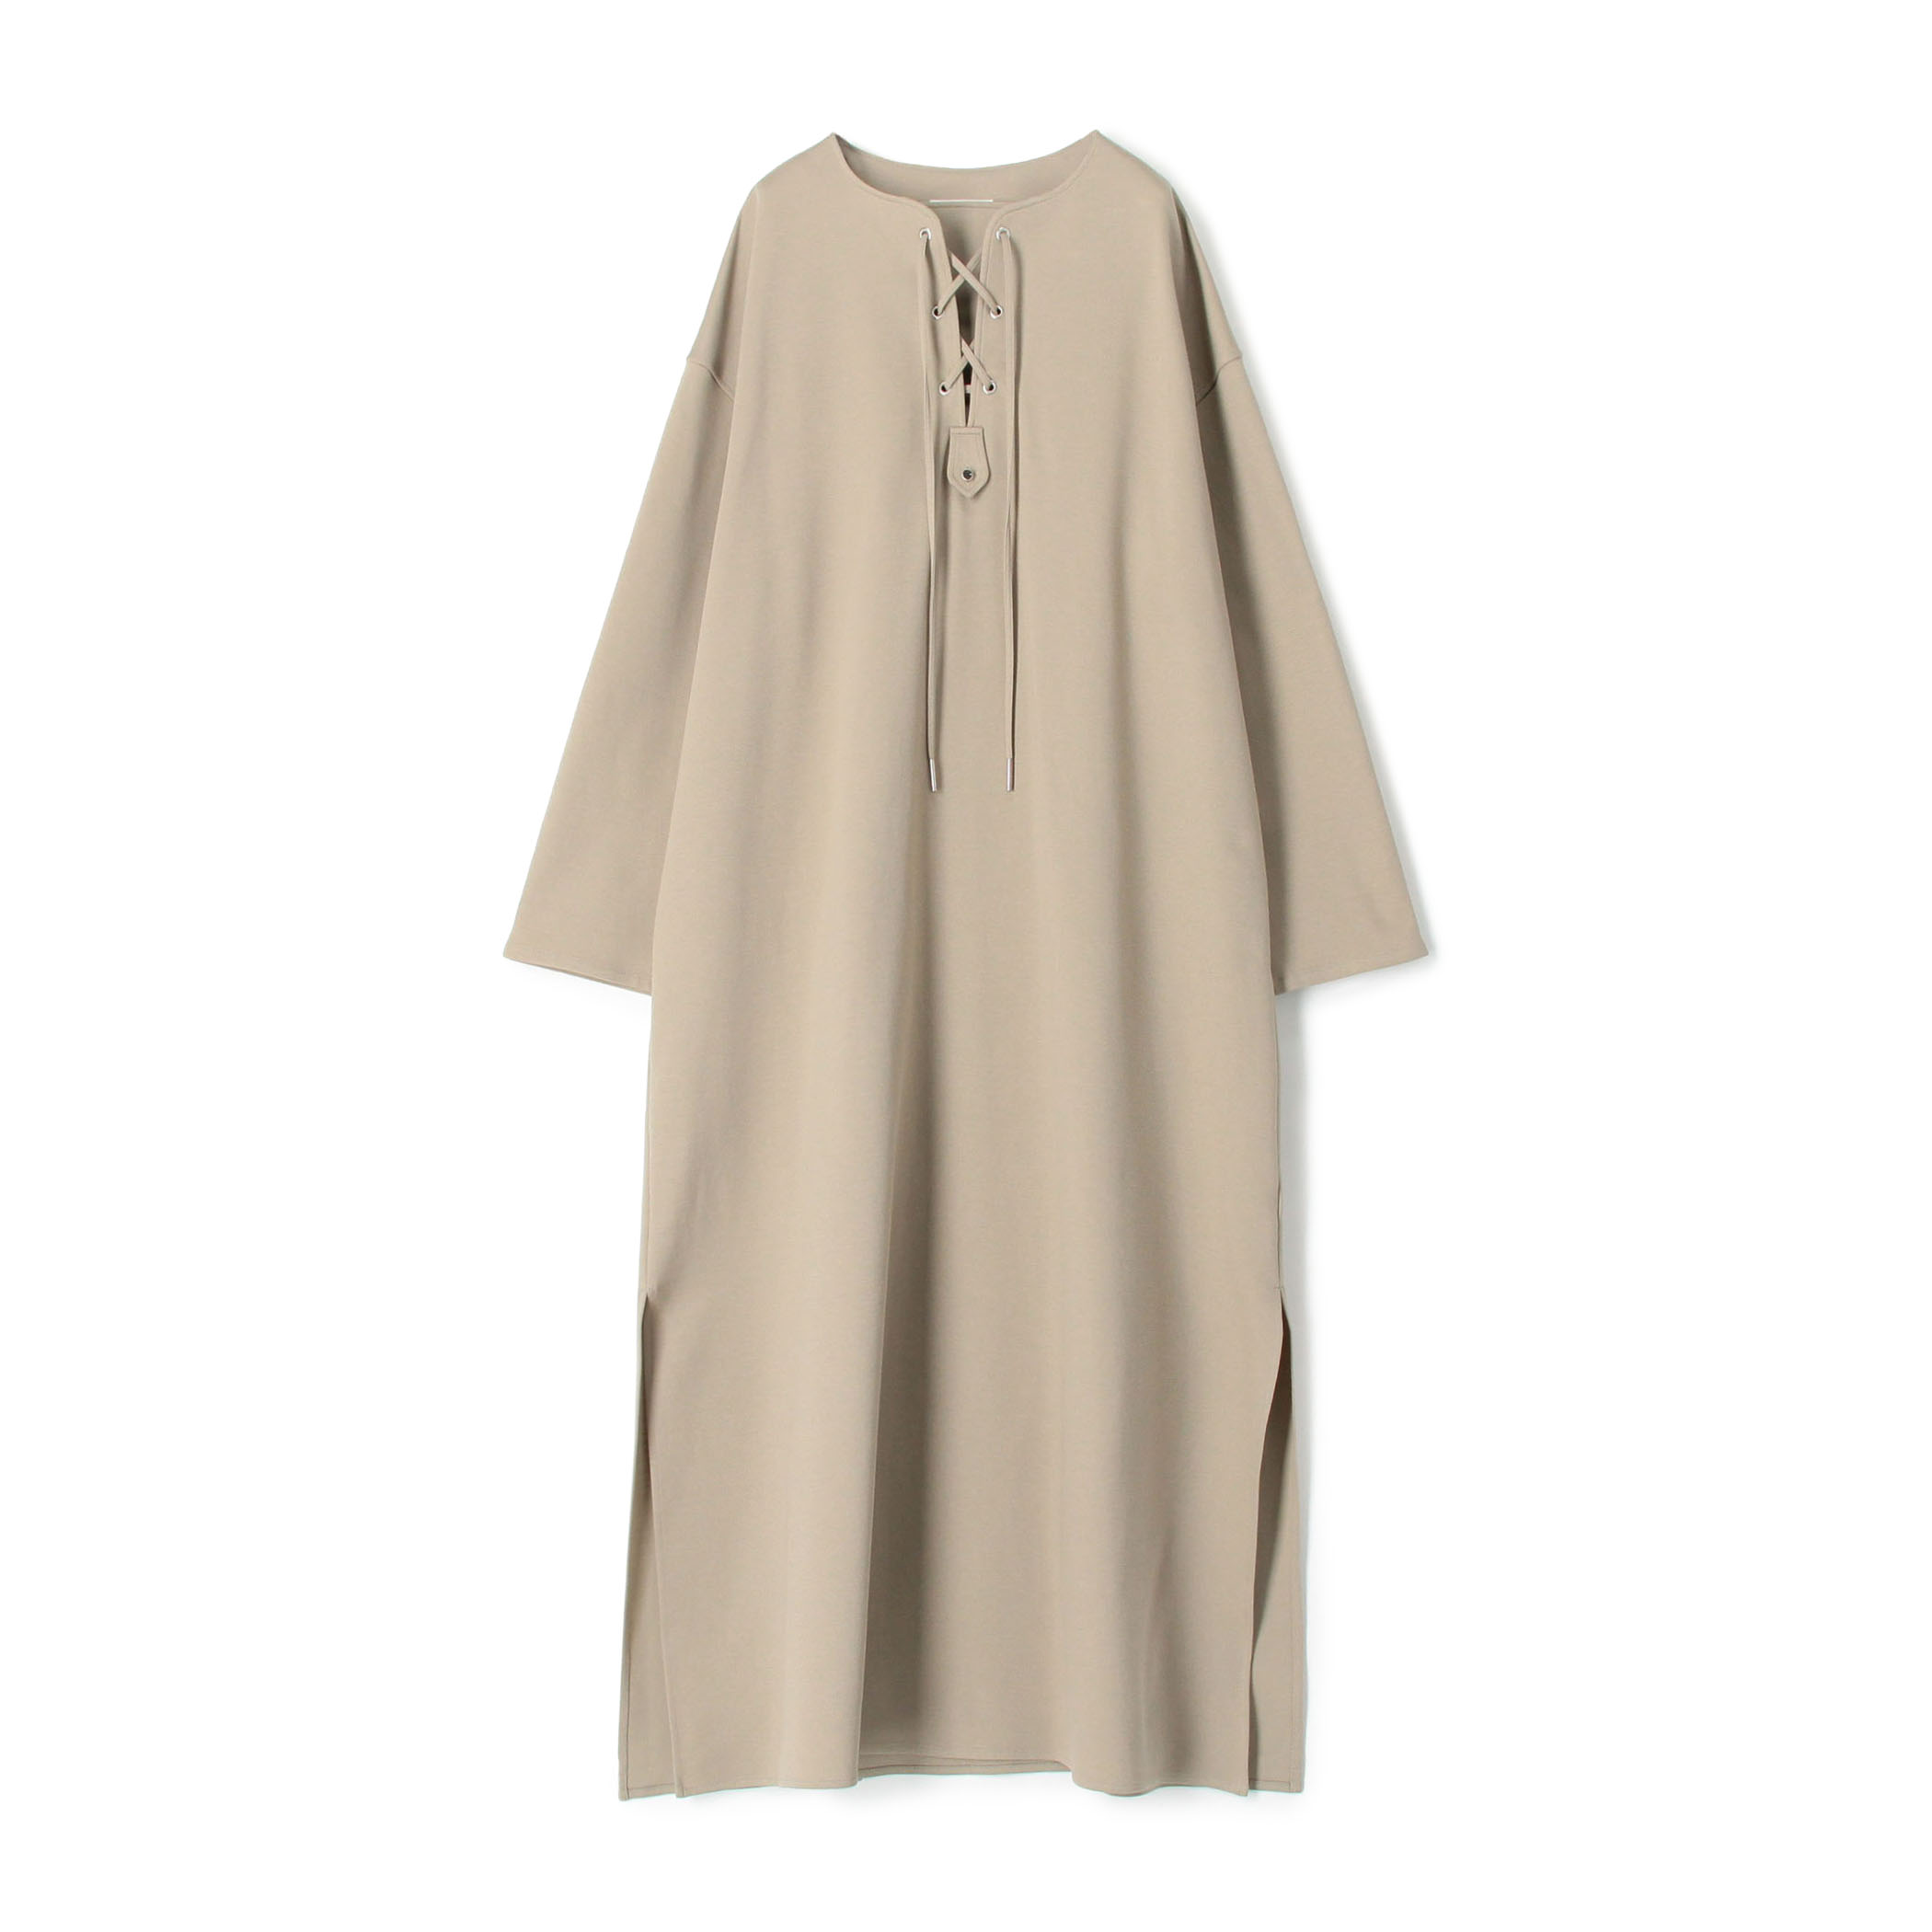 Edition×THE RERACS Collaboration Label MARIN DRESS